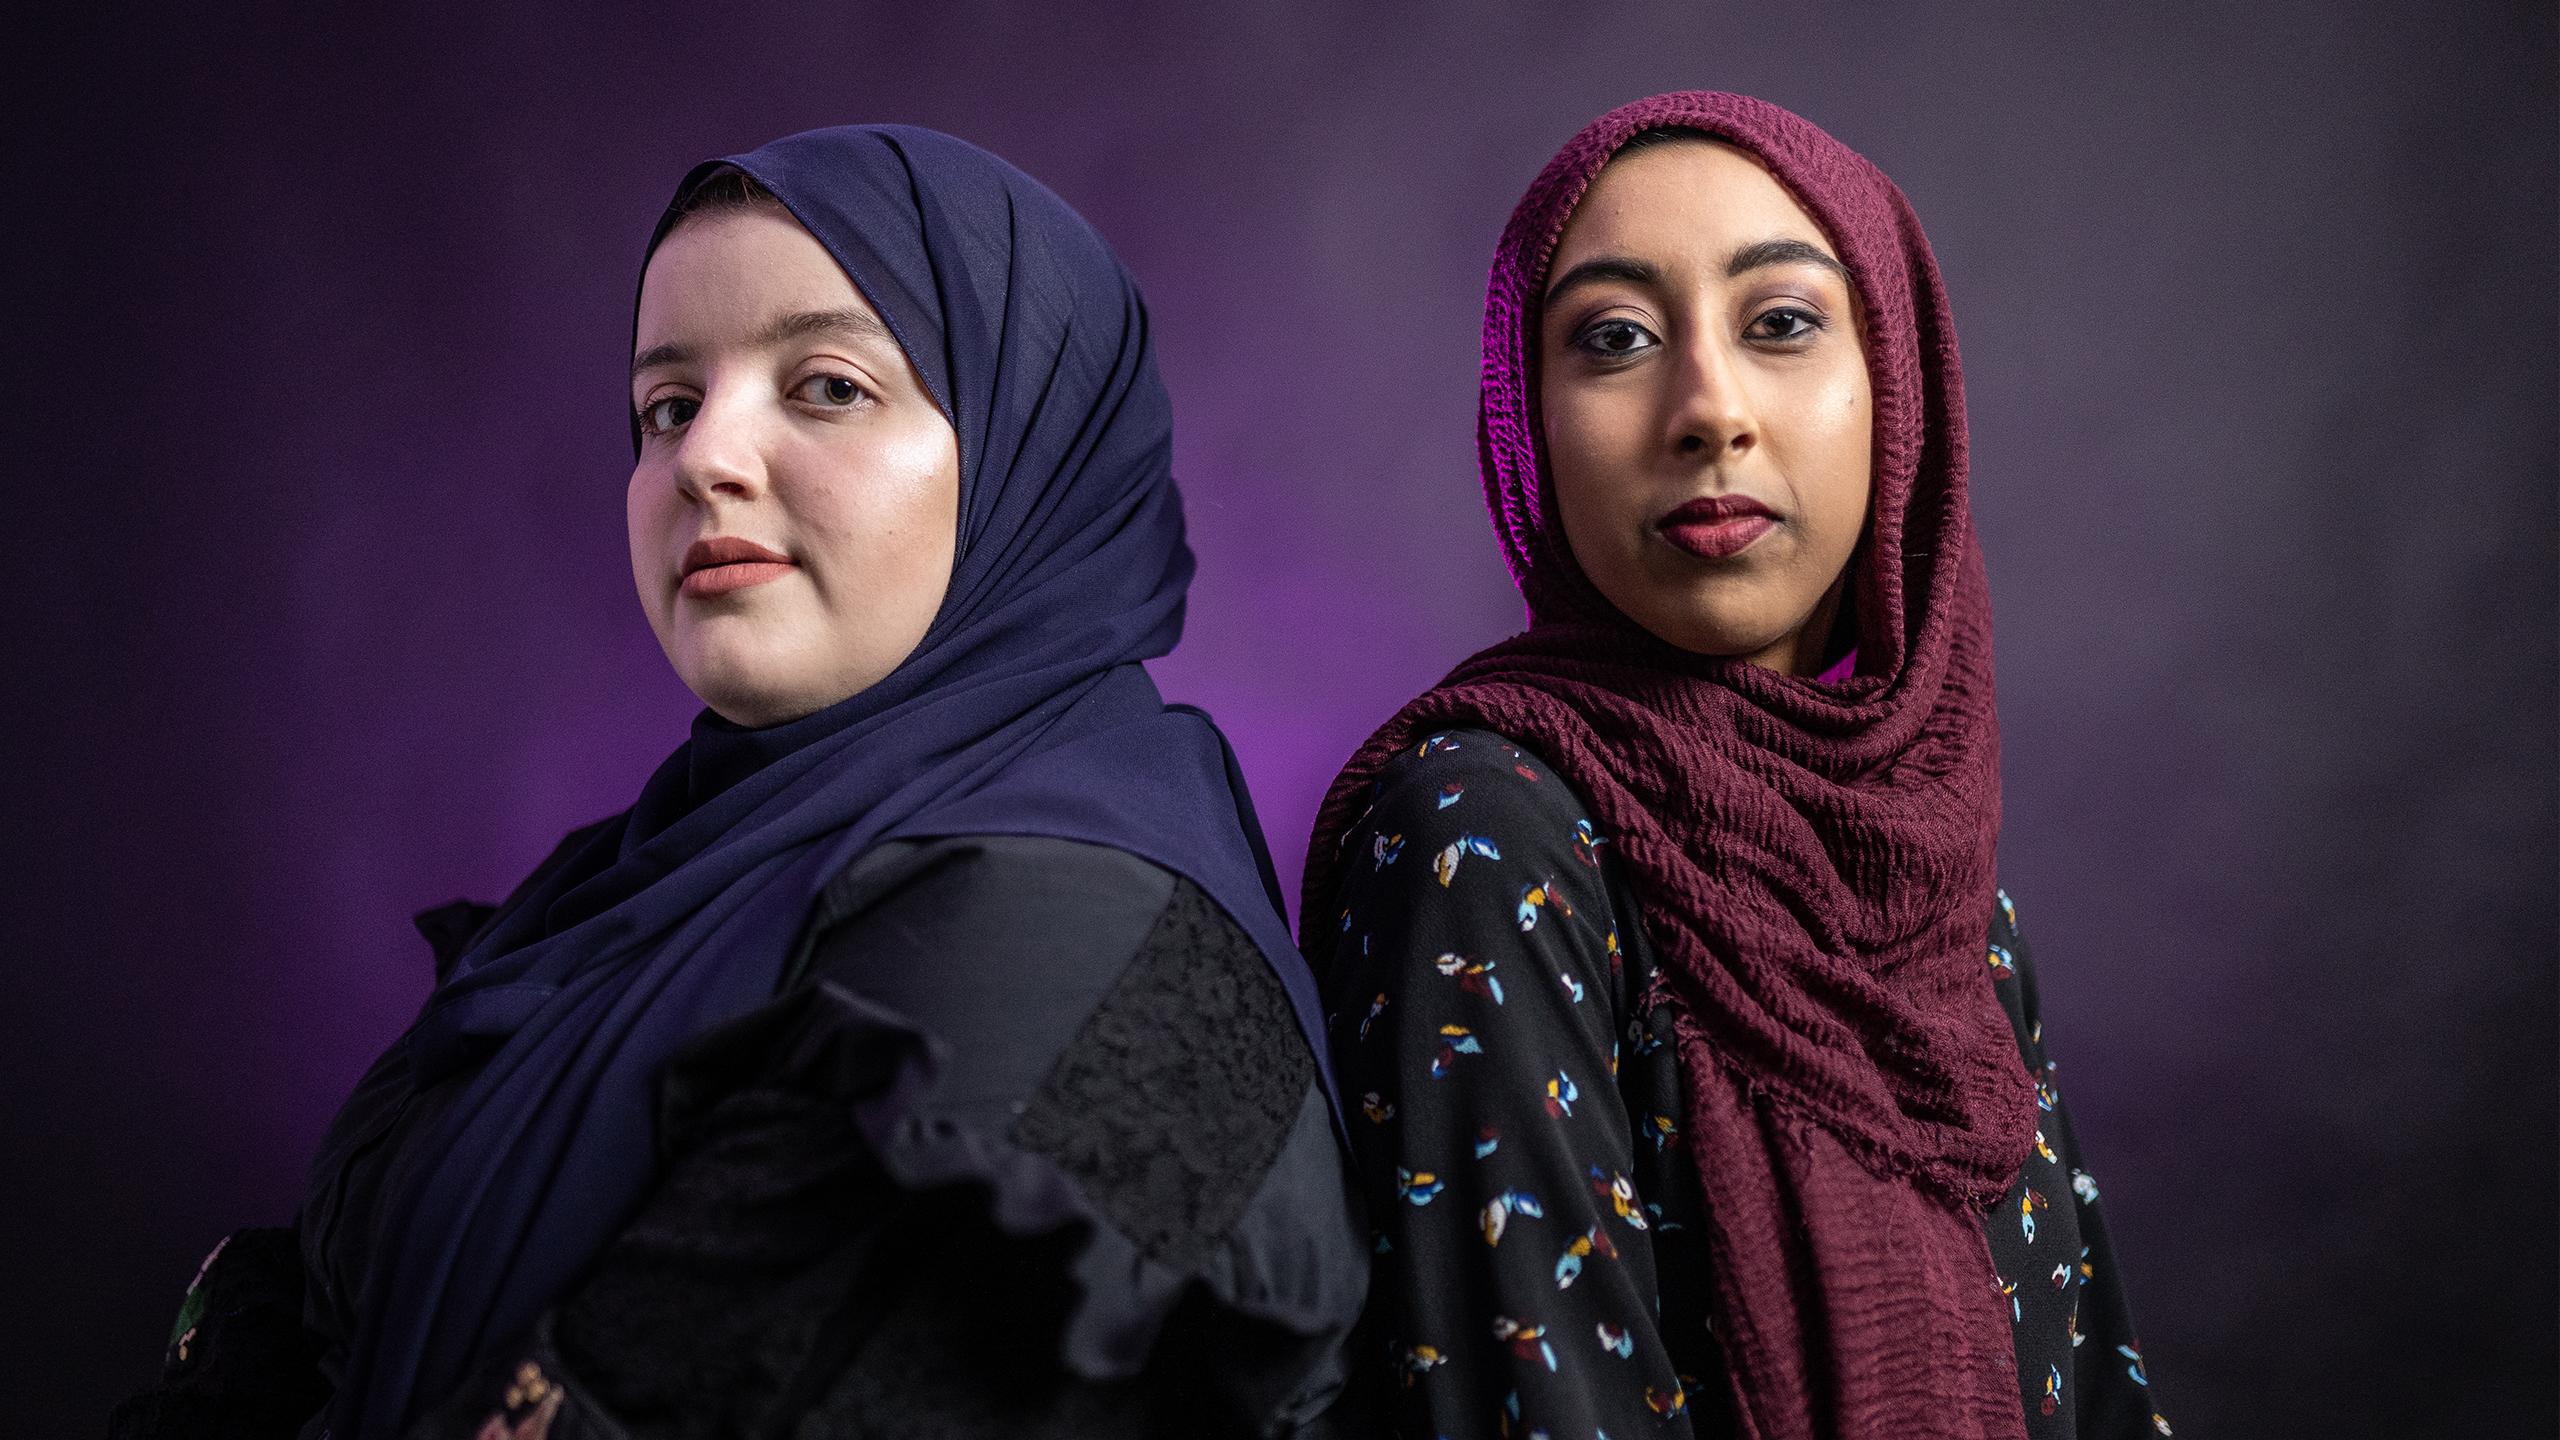 Two hijabi women, one of lighter and one darker complexion, stand side by side